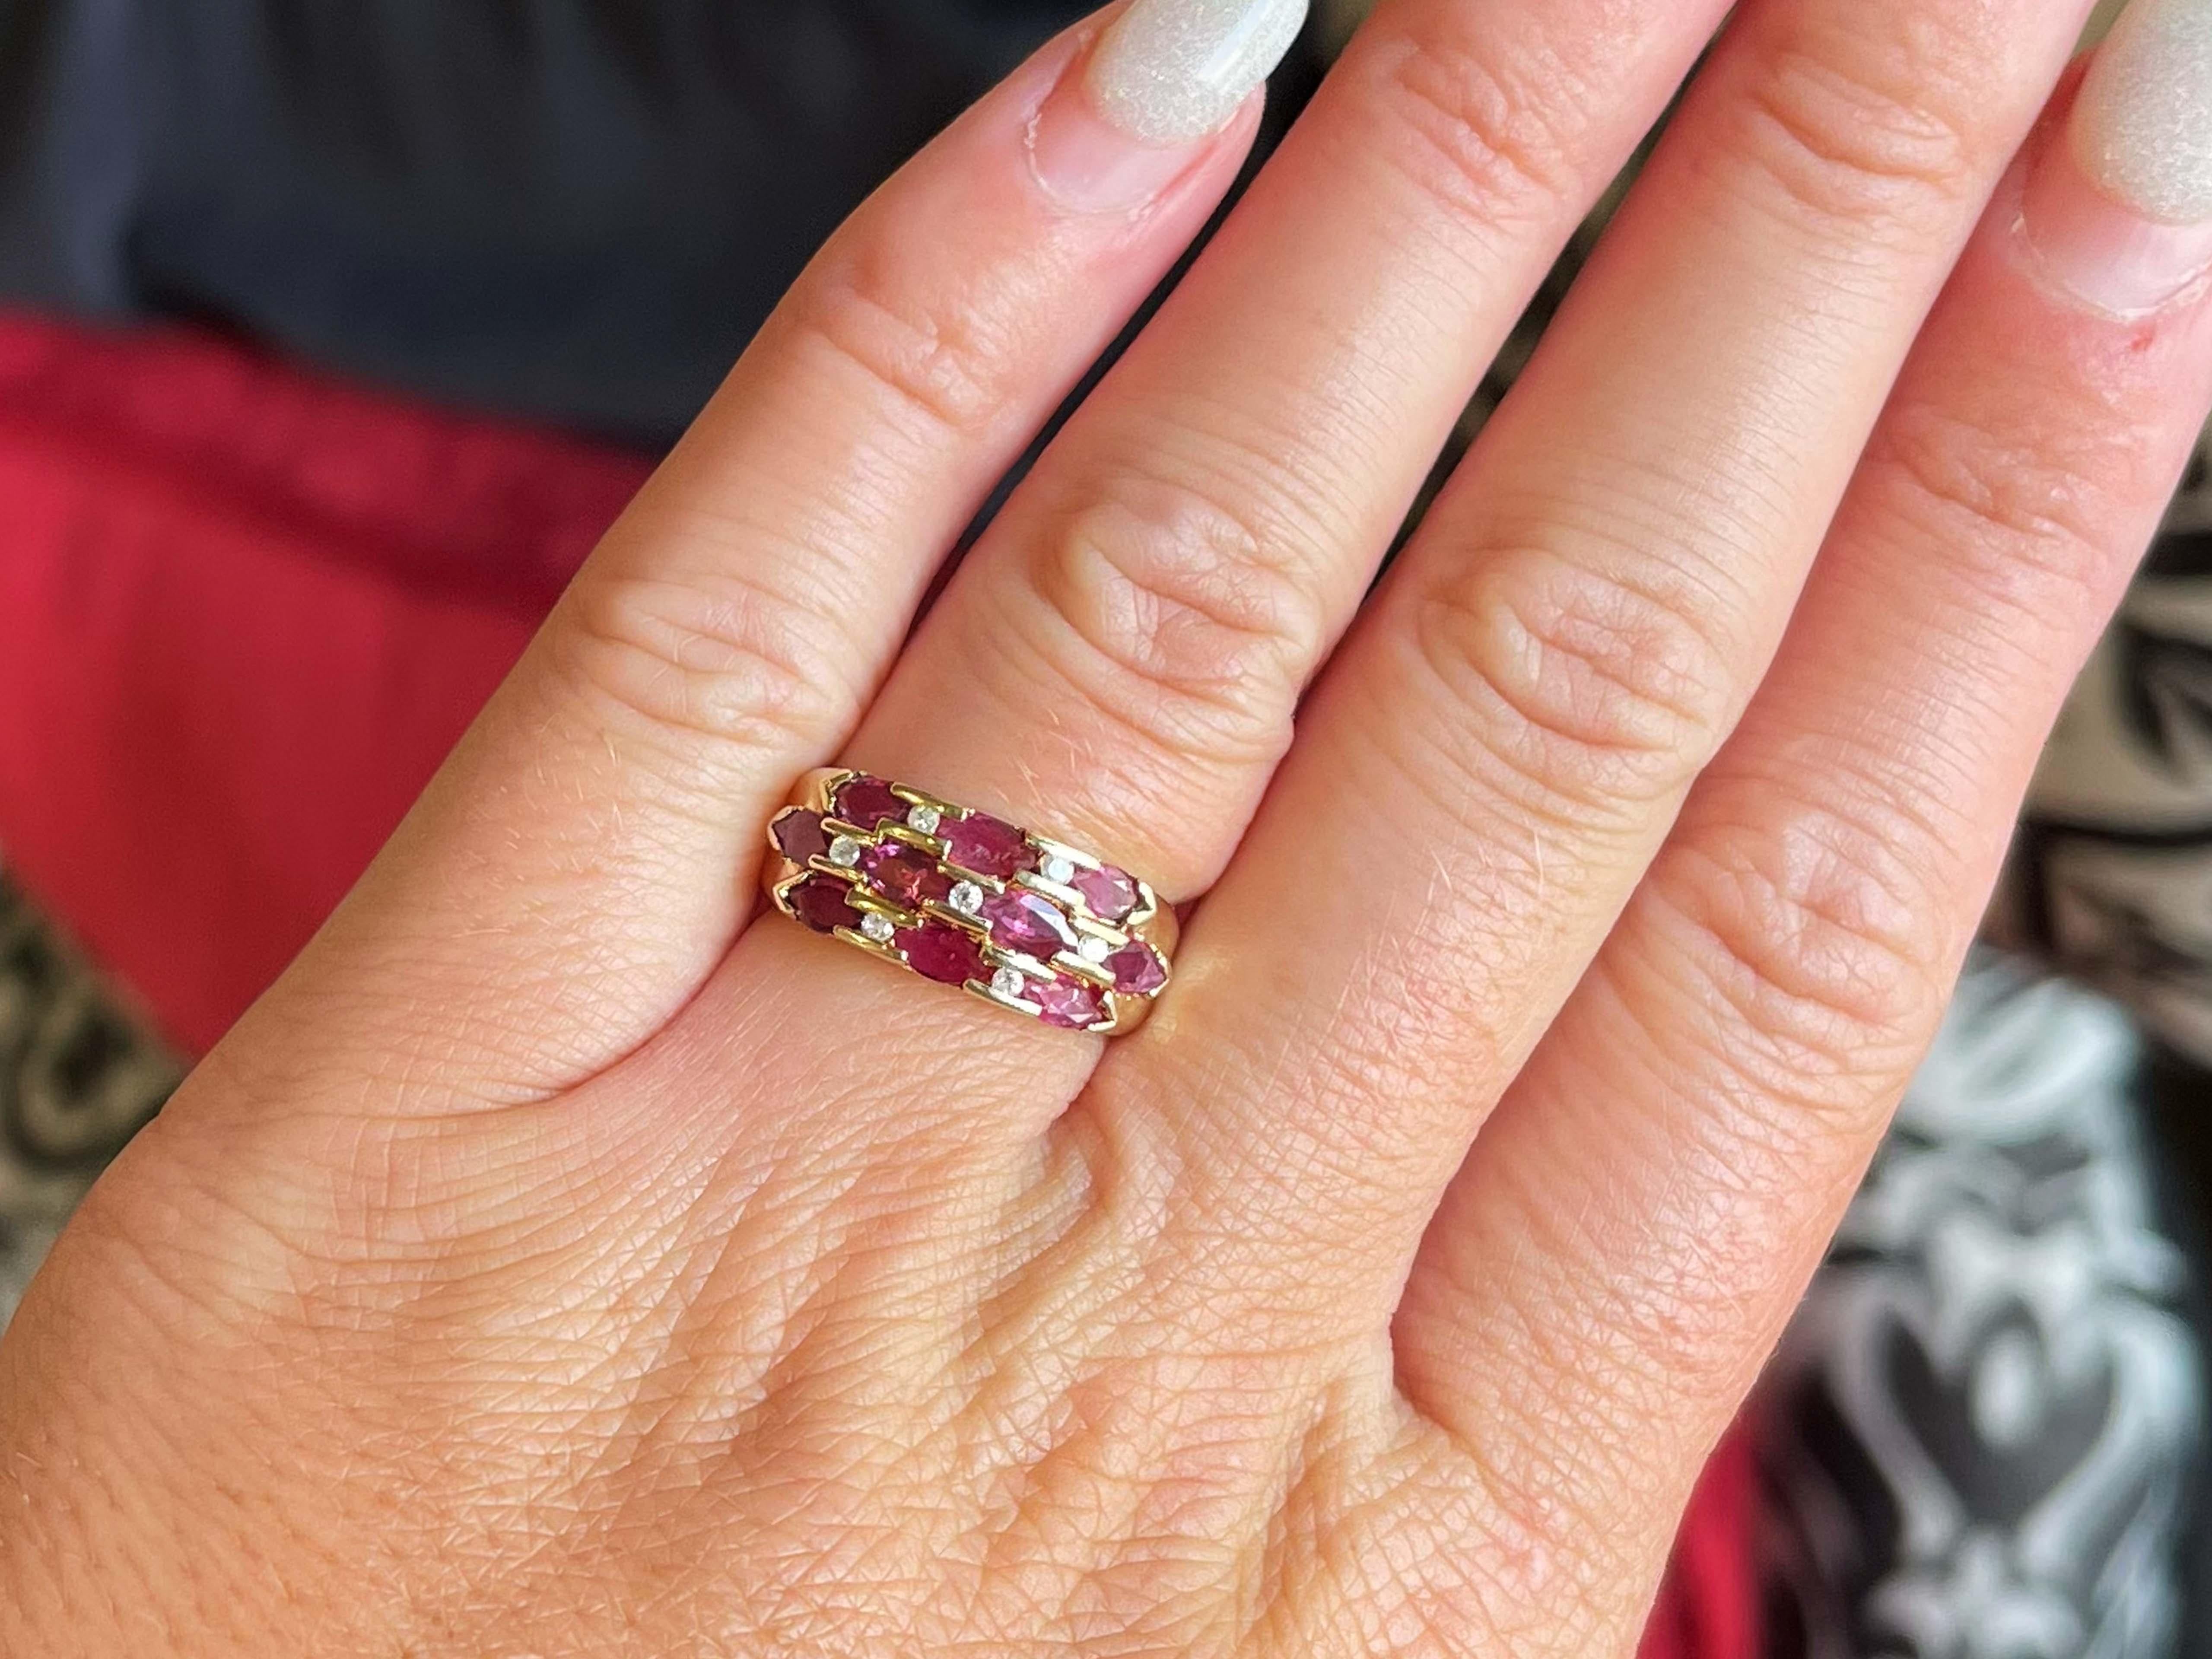 Item Specifications:

Metal: 14K Yellow Gold
Ring Size: 5.5

Total Weight: 3.9 Grams

Gemstone Specifications:

Gemstones: 10 red rubies

Ruby Carat Weight: ~1.00 carats

Diamond Carat Weight: 0.07 carats

Diamond Count: 7

Diamond Color: